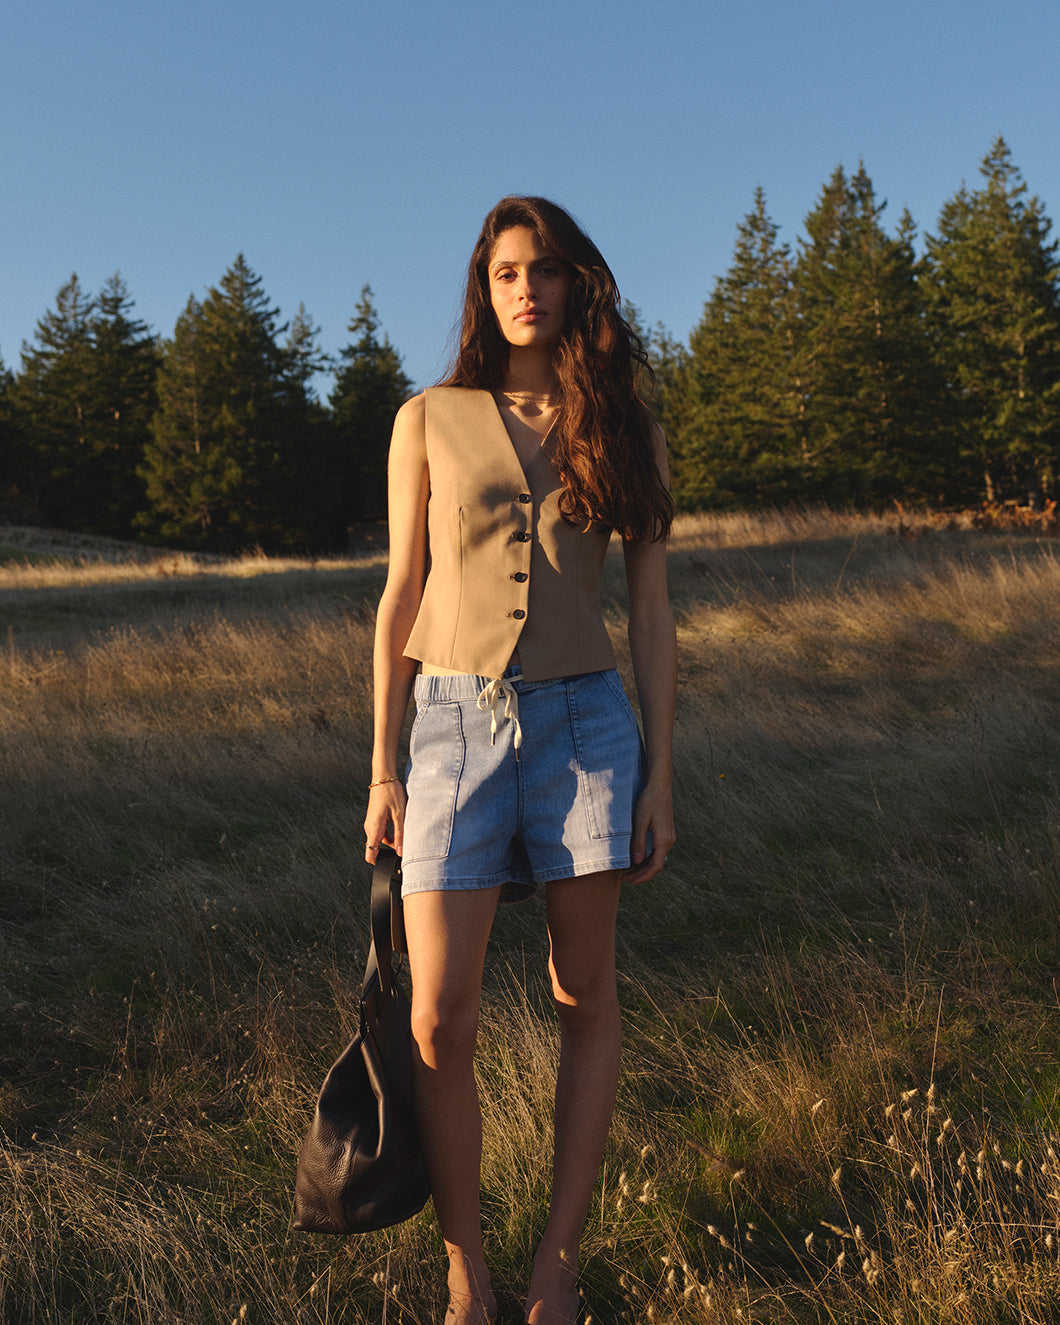 A woman stands outdoors in a grassy field. Wearing a beige sleeveless buttoned top and denim shorts, holds a black bag in her hand.